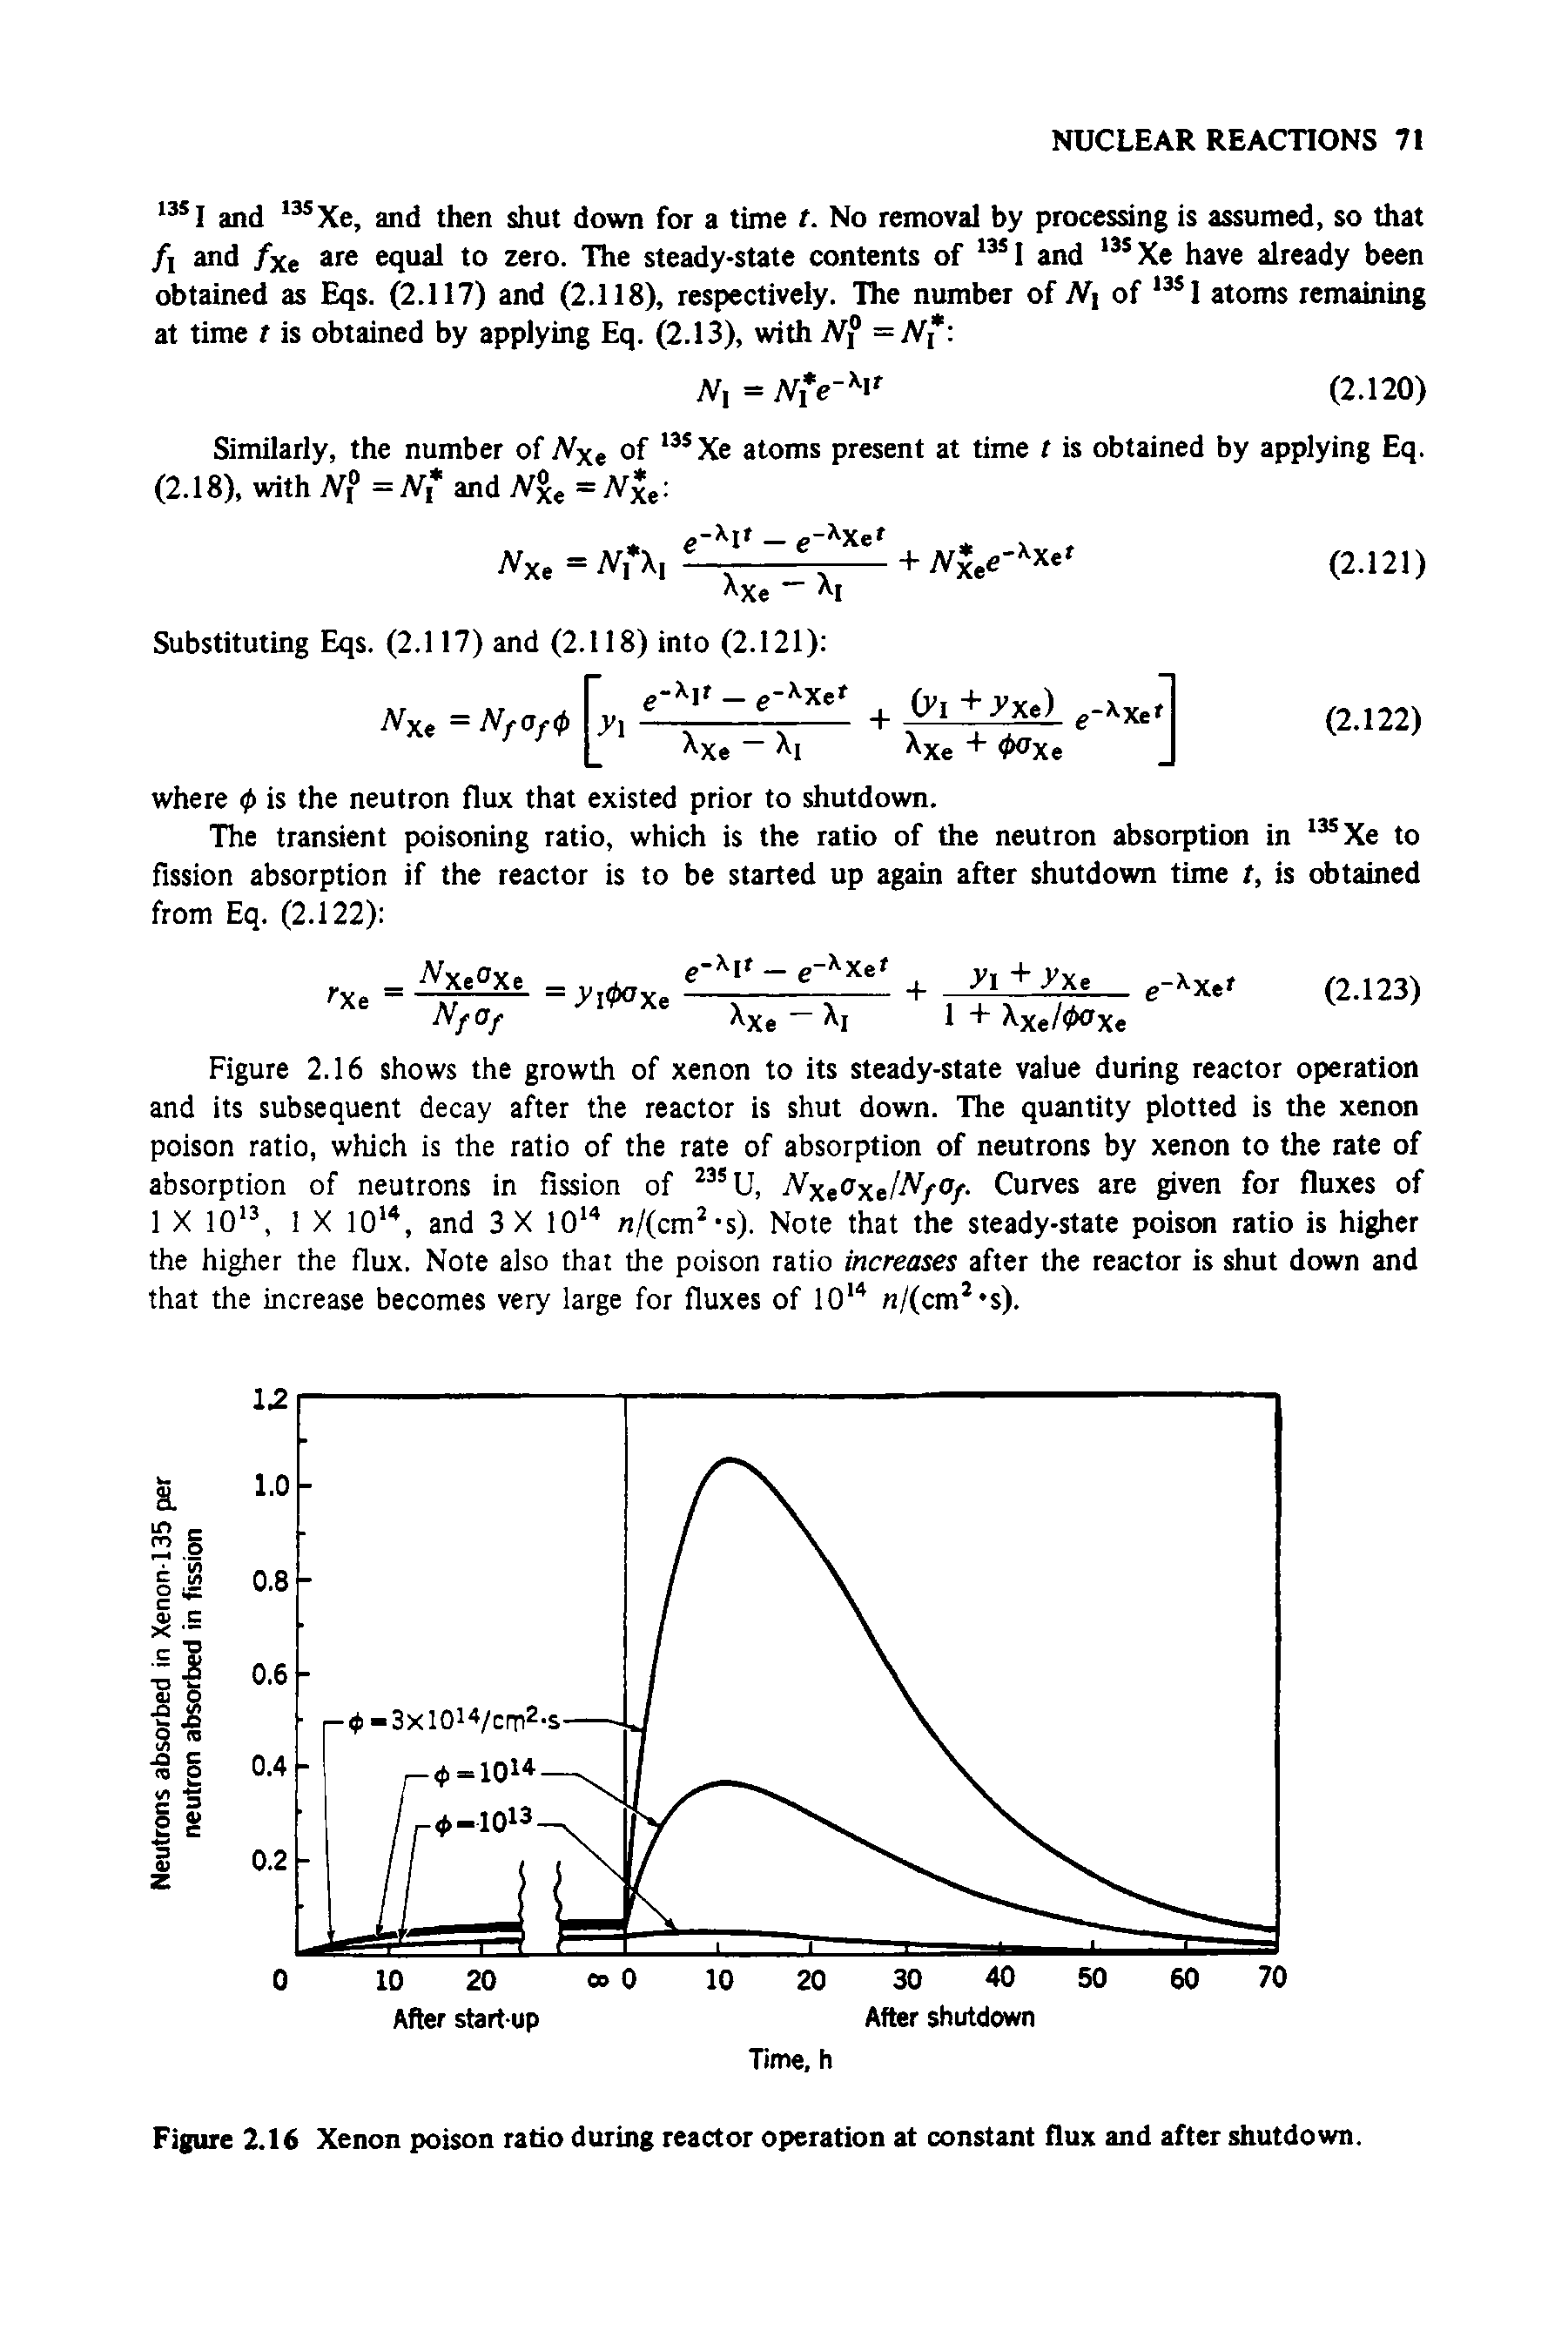 Figure 2.16 Xenon poison ratio during reactor operation at constant flux and after shutdown.